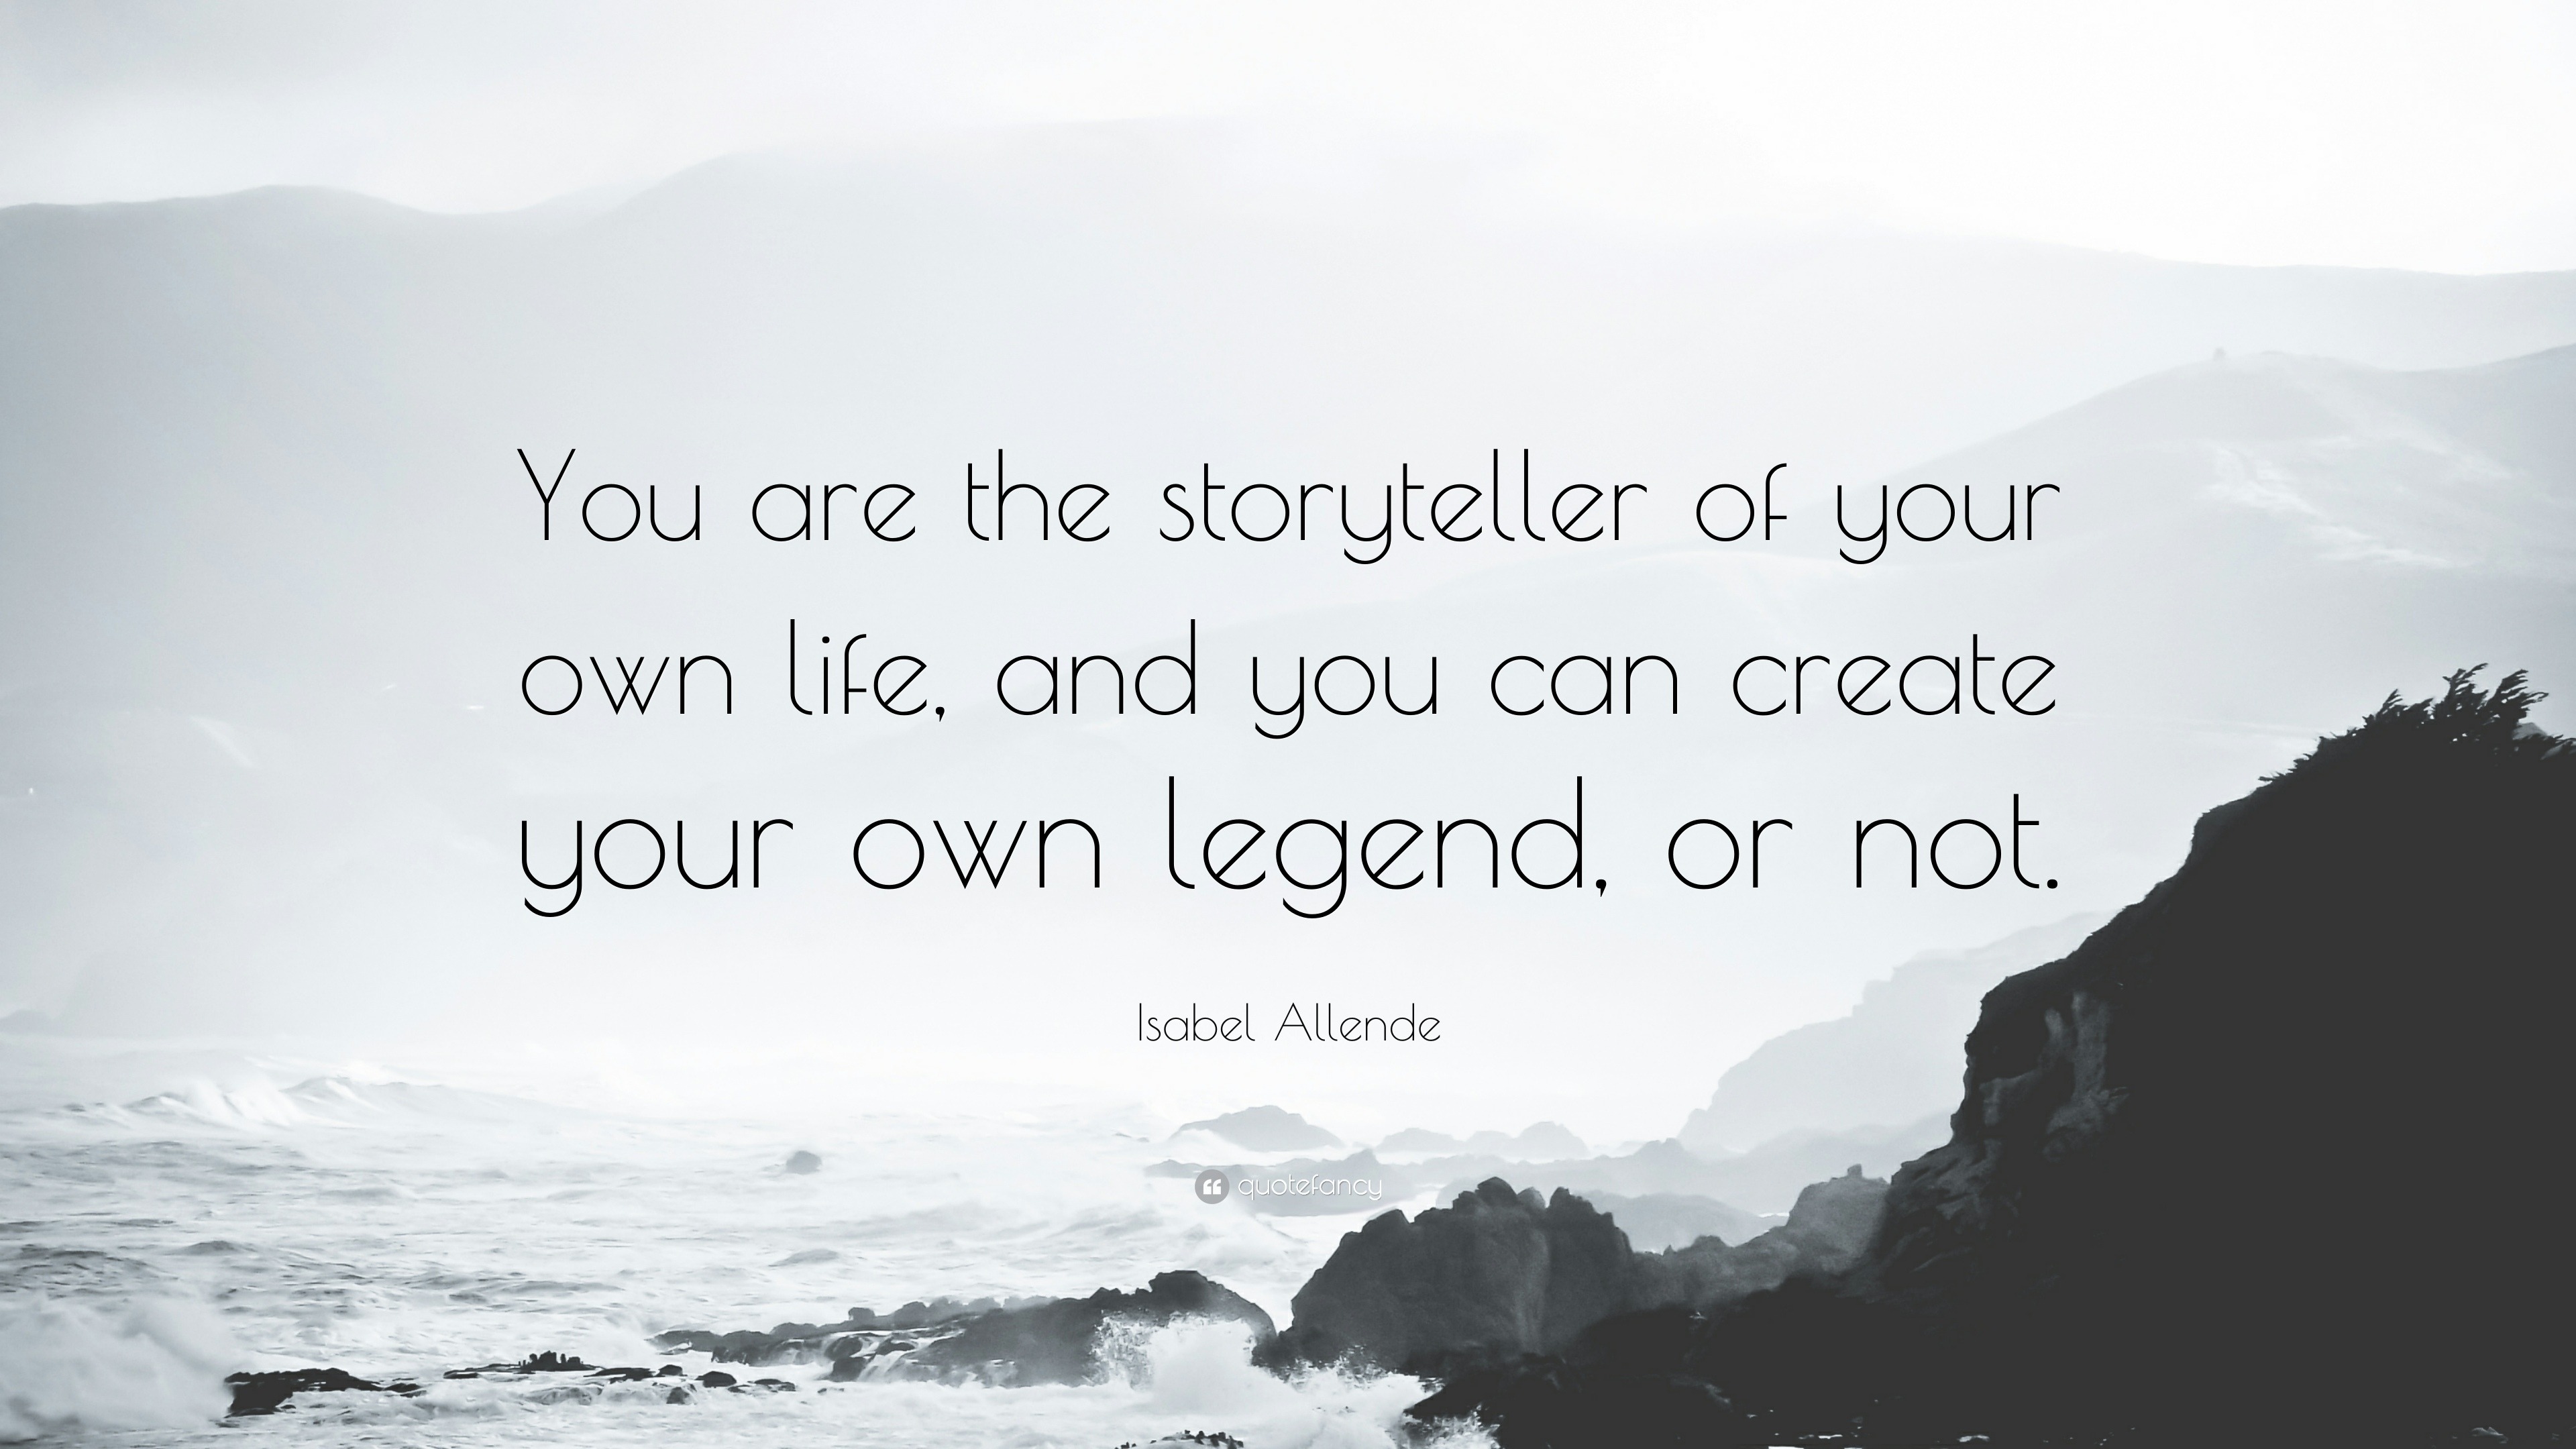 Isabel Allende Quote “you Are The Storyteller Of Your Own Life And